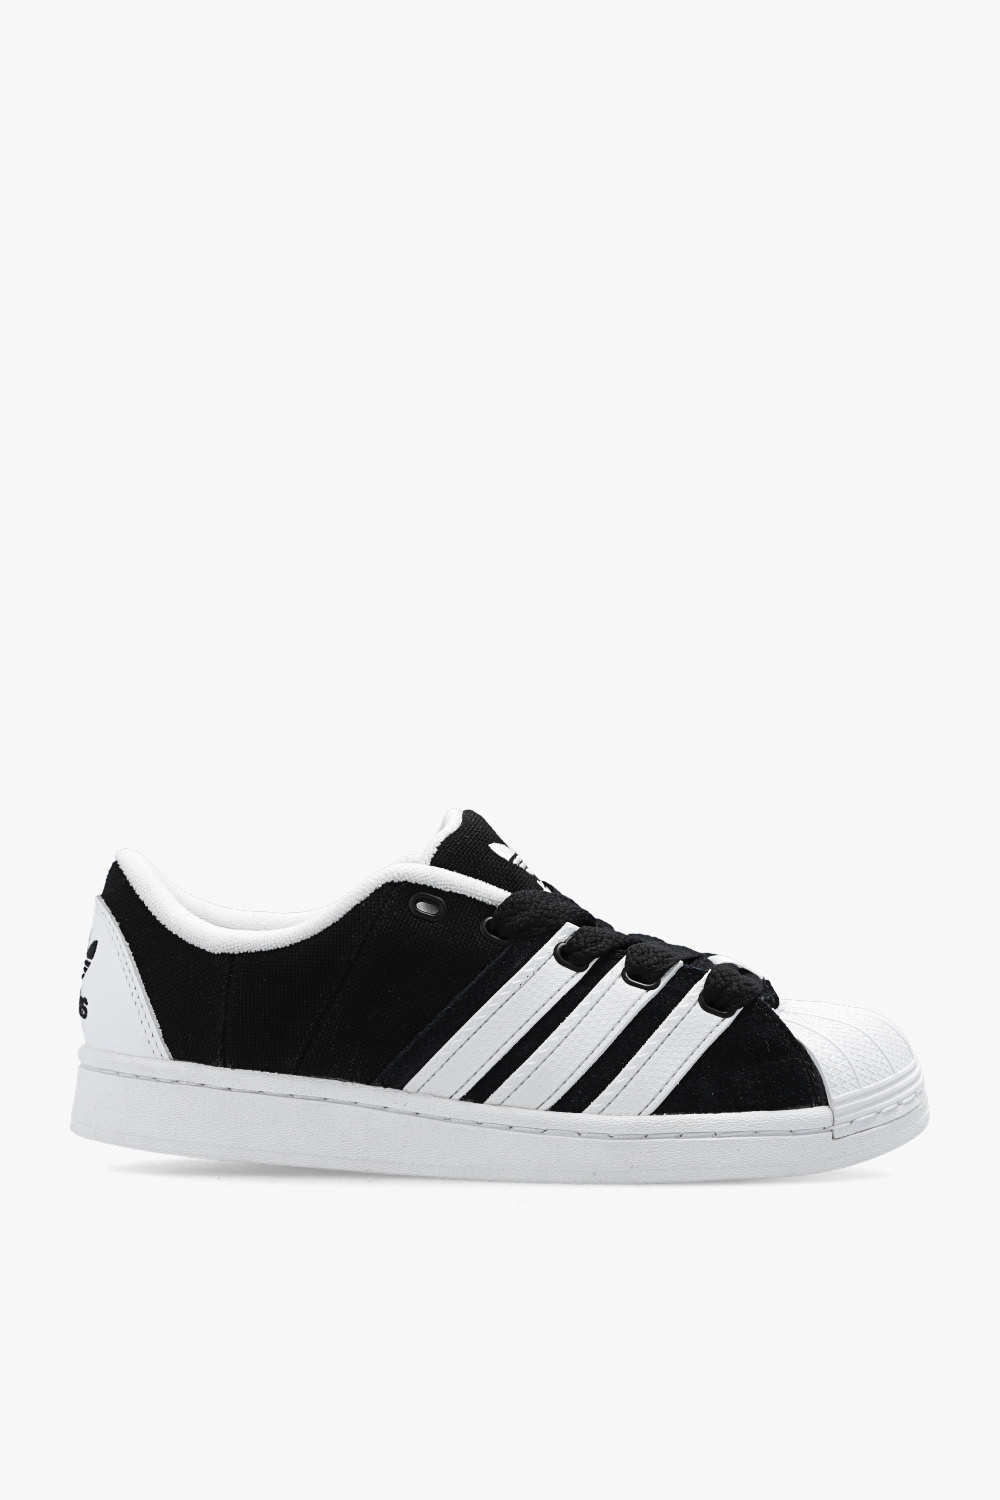 ADIDAS Originals \'SUPERSTAR SUPERMODIFIED\' sneakers | StclaircomoShops |  adidas info poster dress ideas for adults girls | Men\'s Shoes